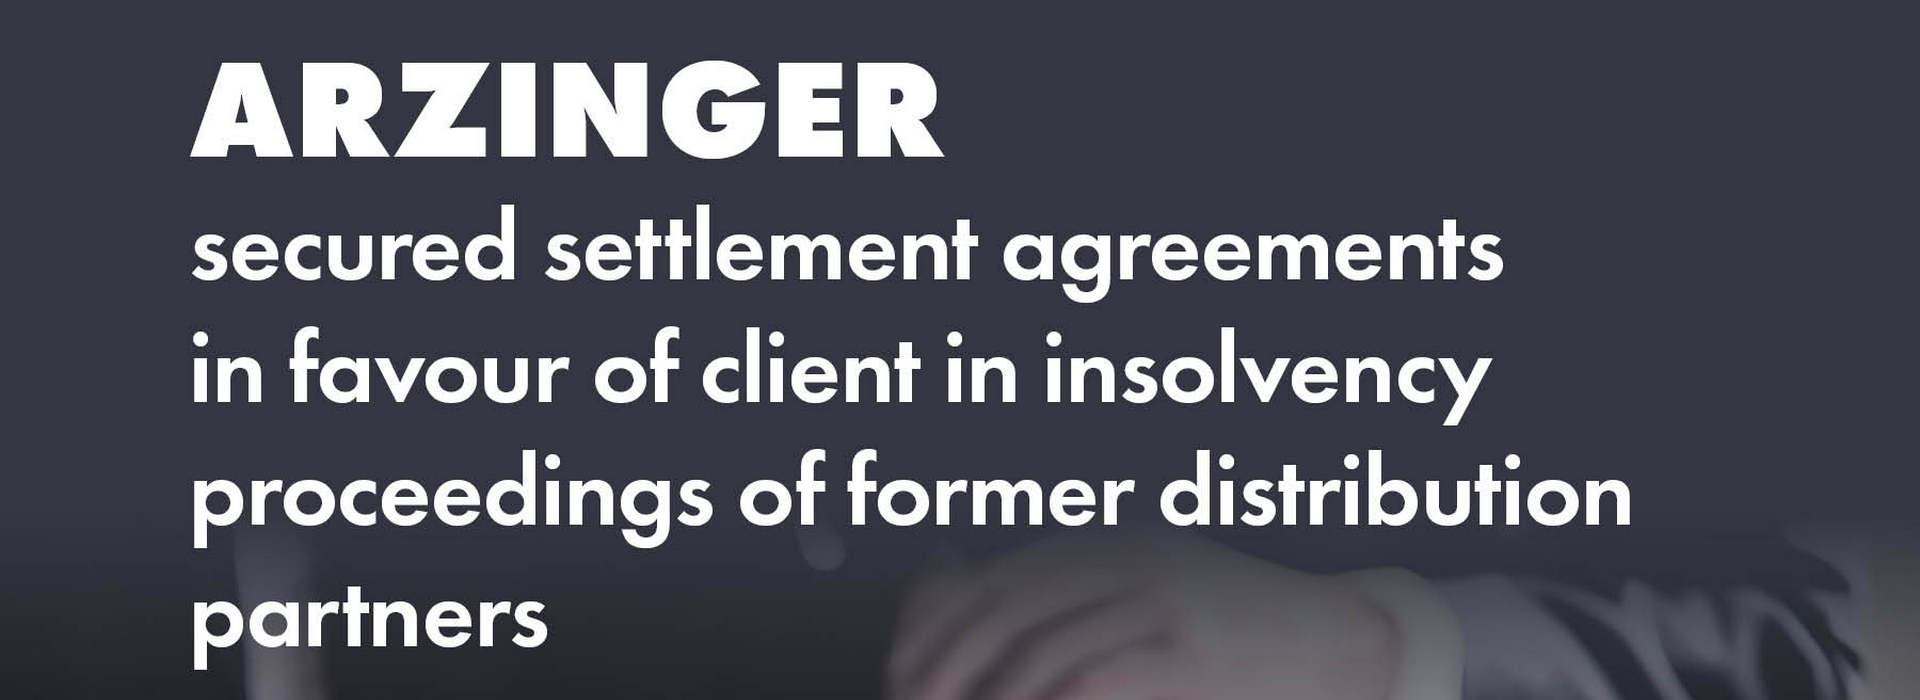 Arzinger Secured Settlement Agreements in Favour of Client (Large International Company) in Insolvency Proceedings of Former Distribution Partners